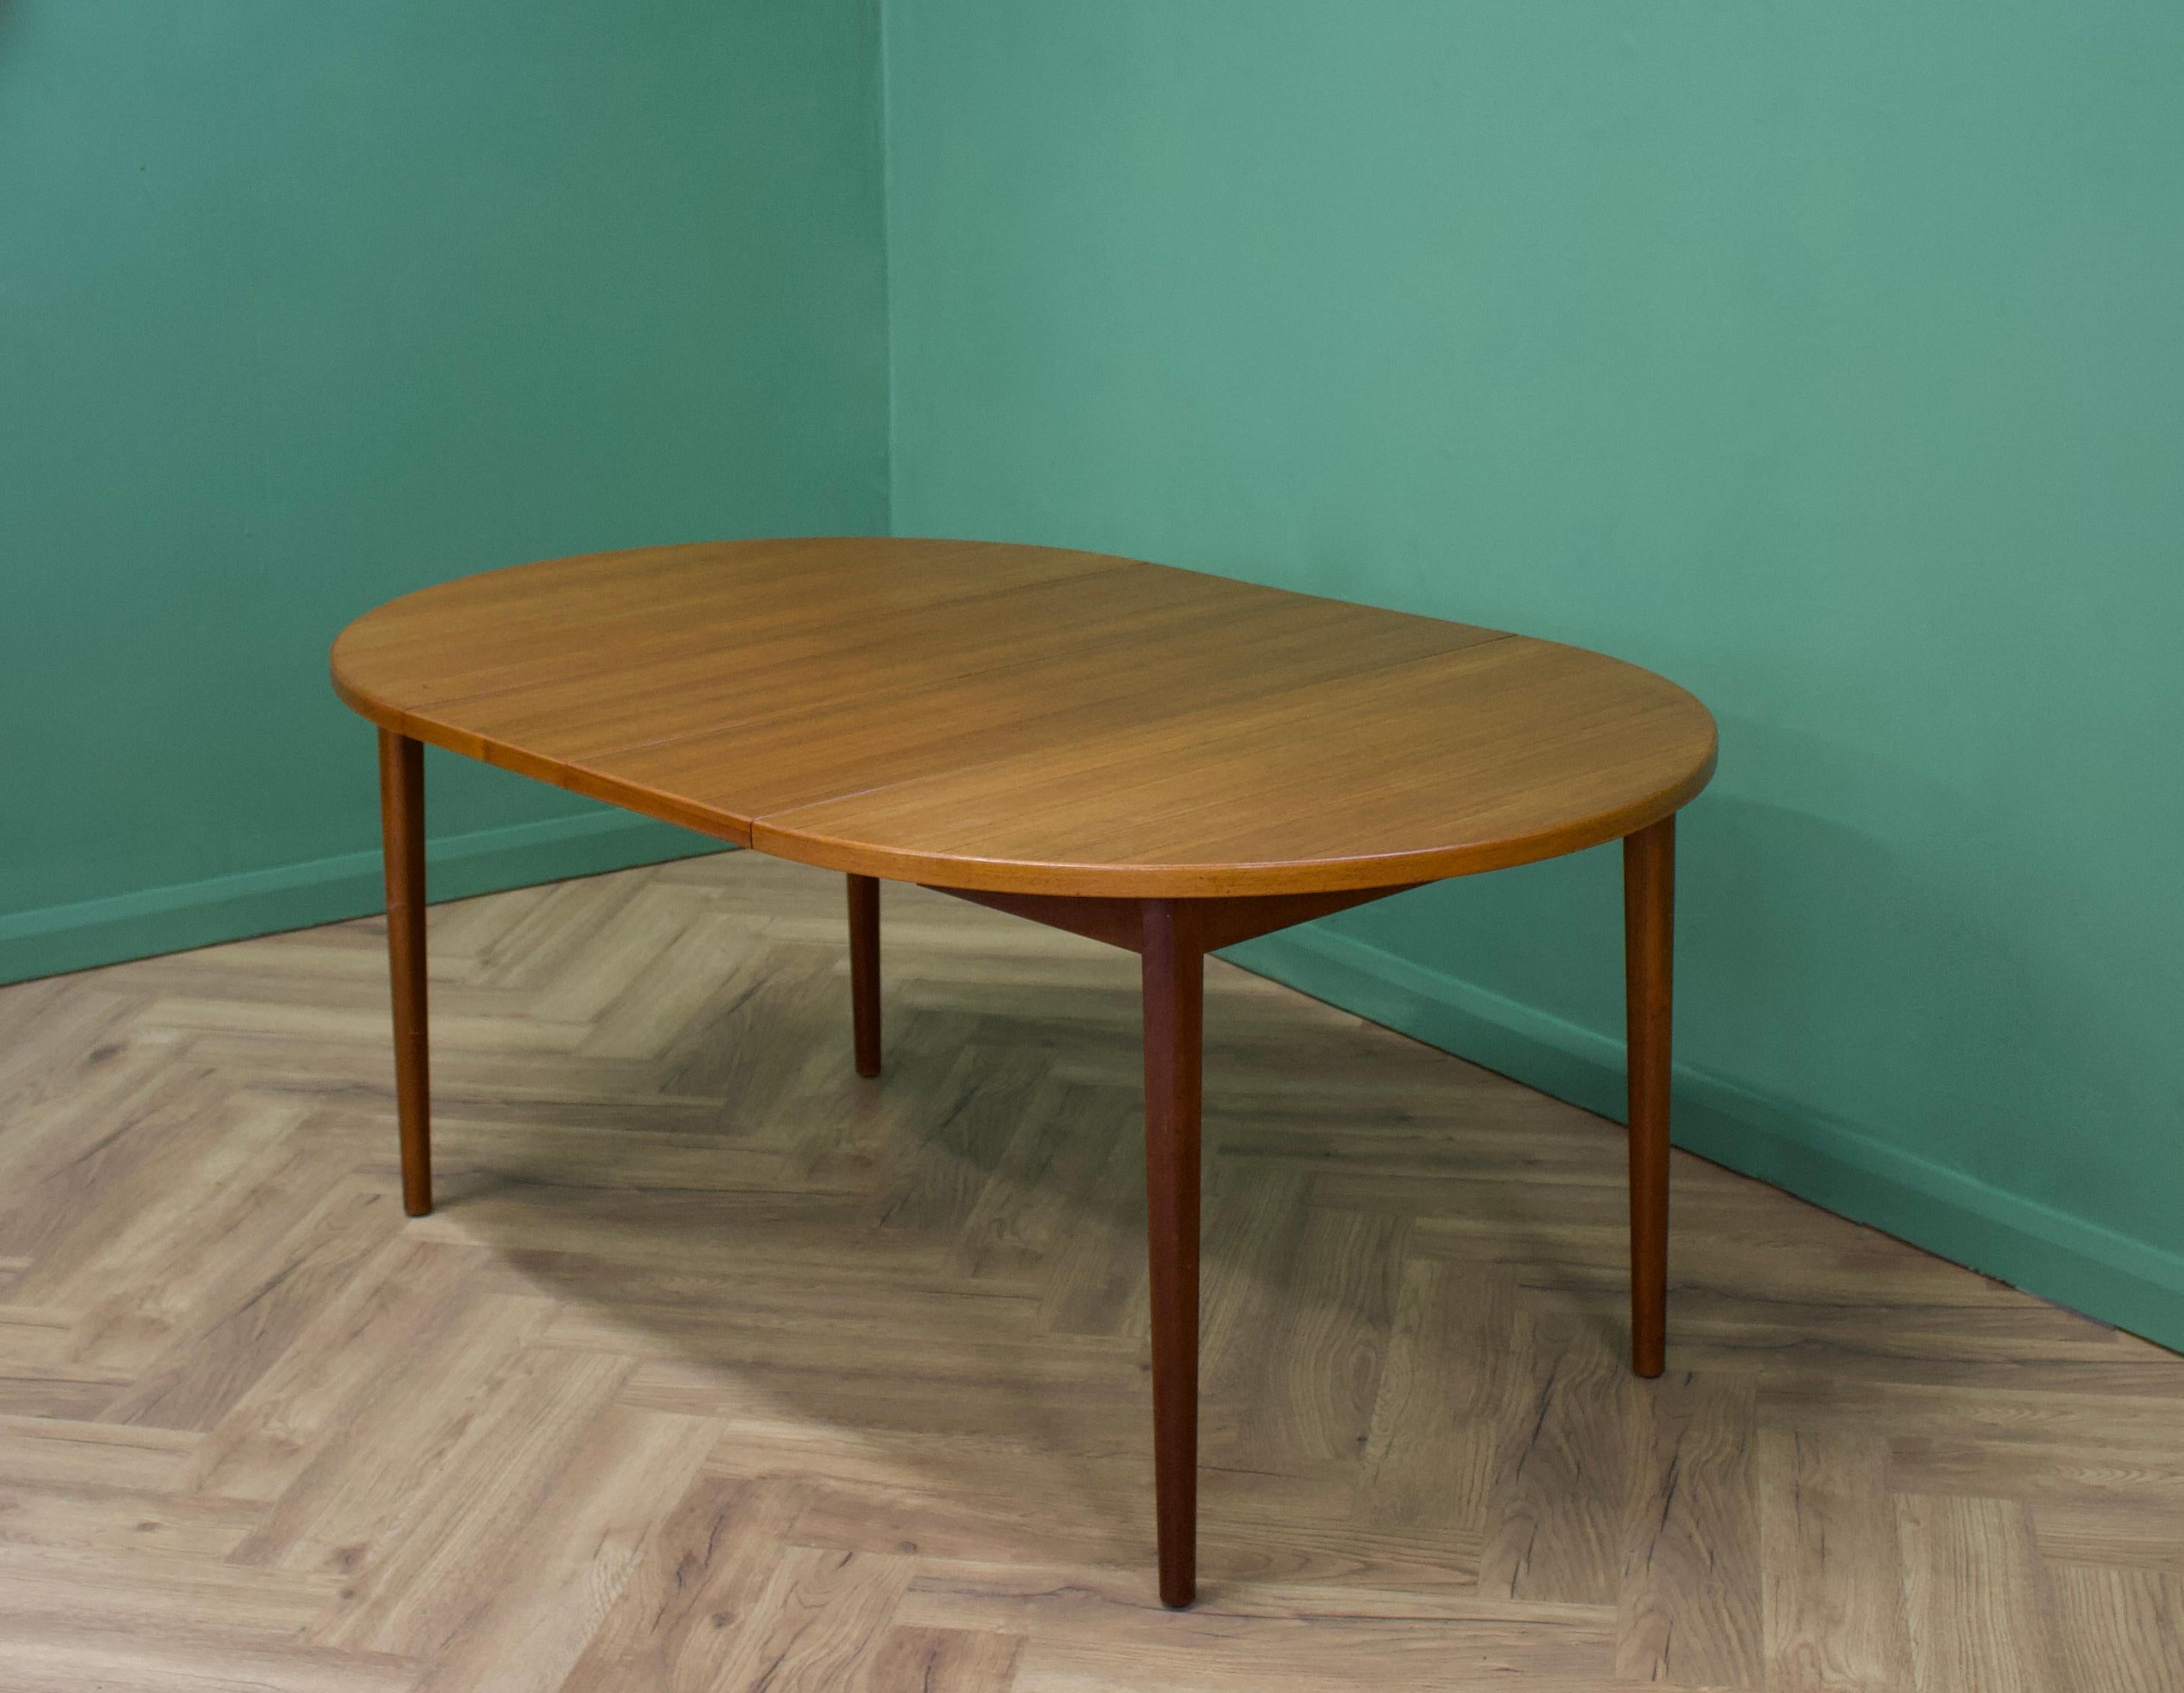 - Midcentury round extending dining table from Troeds
- Made from teak and teak veneer
- Extended width 170 cm.